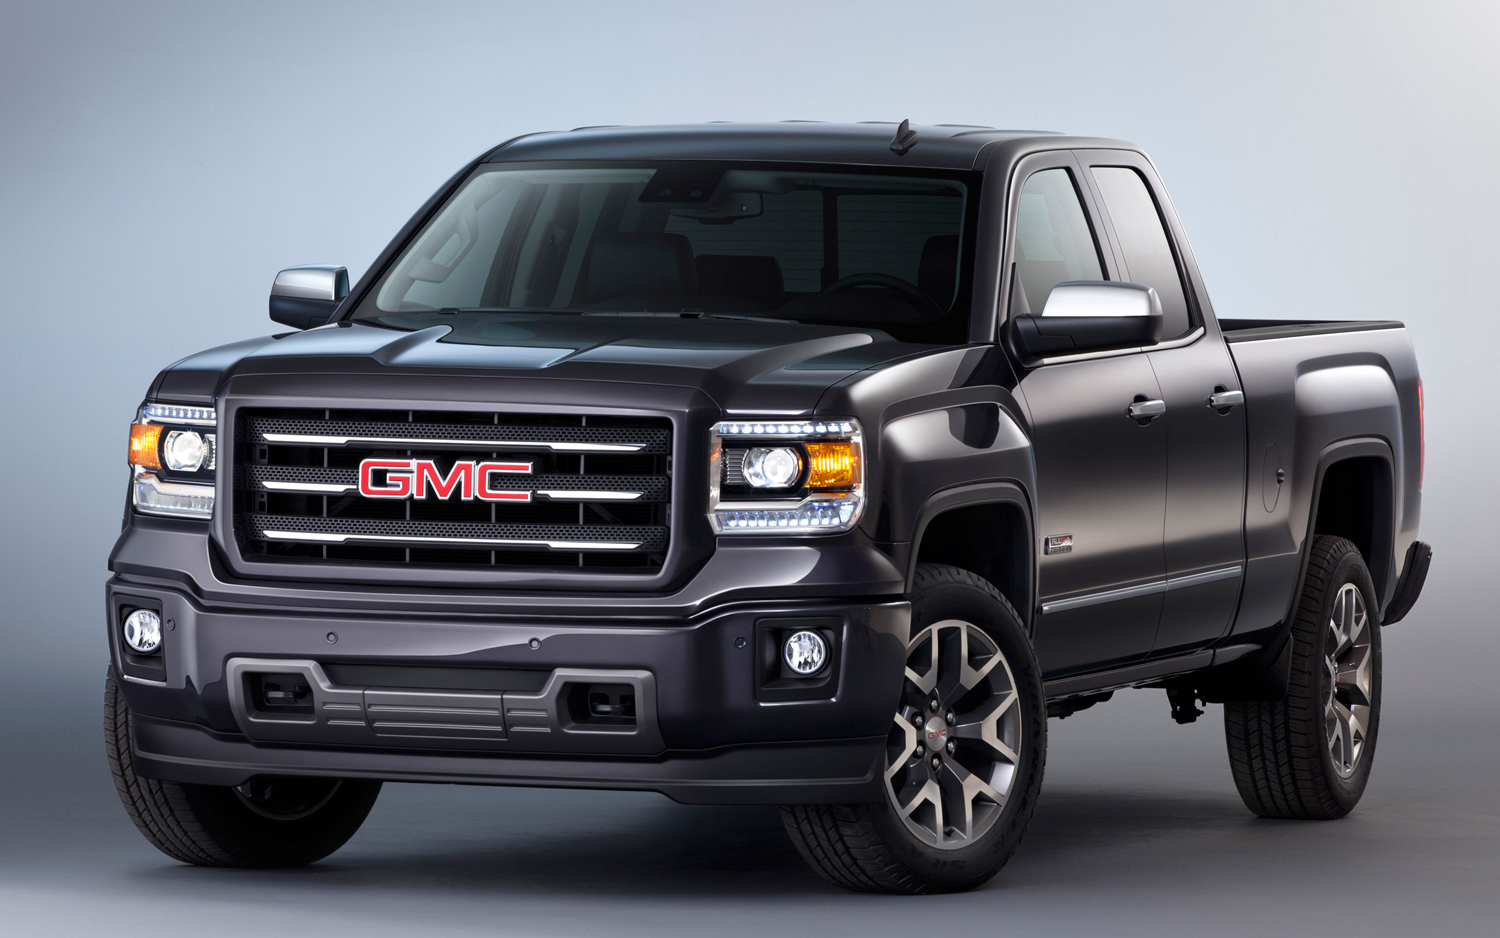 Images of Gmc Truck | 1500x938